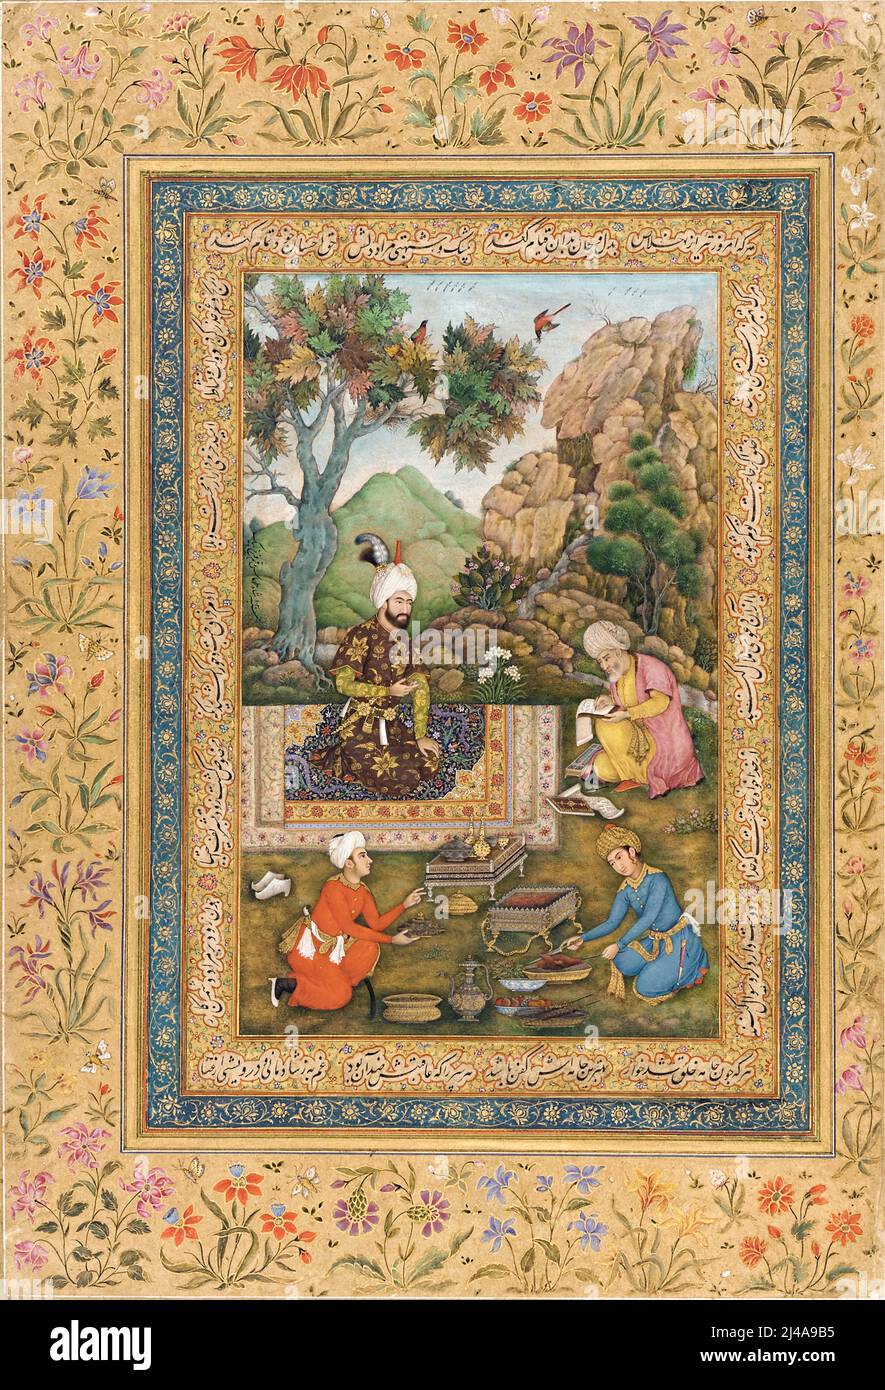 Shah Tahmasp in the mountains by Indian artist Farrukh Beg (c.1547-1619) court painter to the great Moghul emperor Shah Jaha. Stock Photo